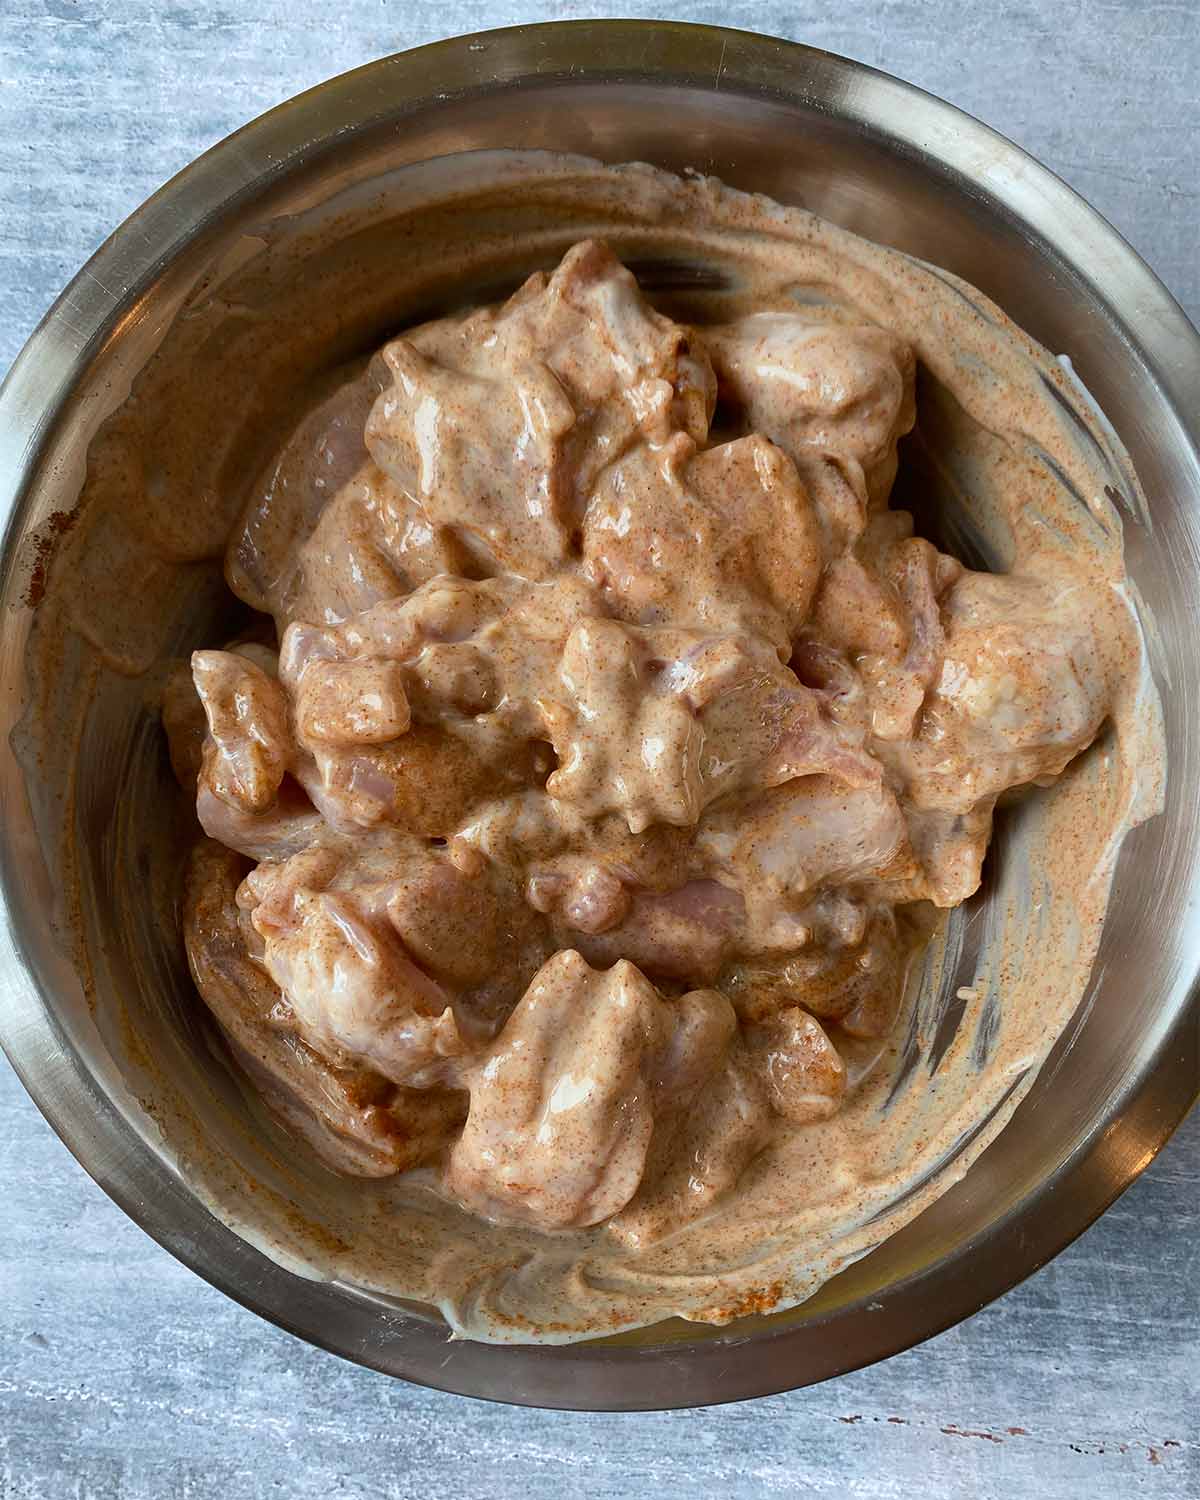 A bowl with chunks of chicken marinating in a brown yogurt sauce.